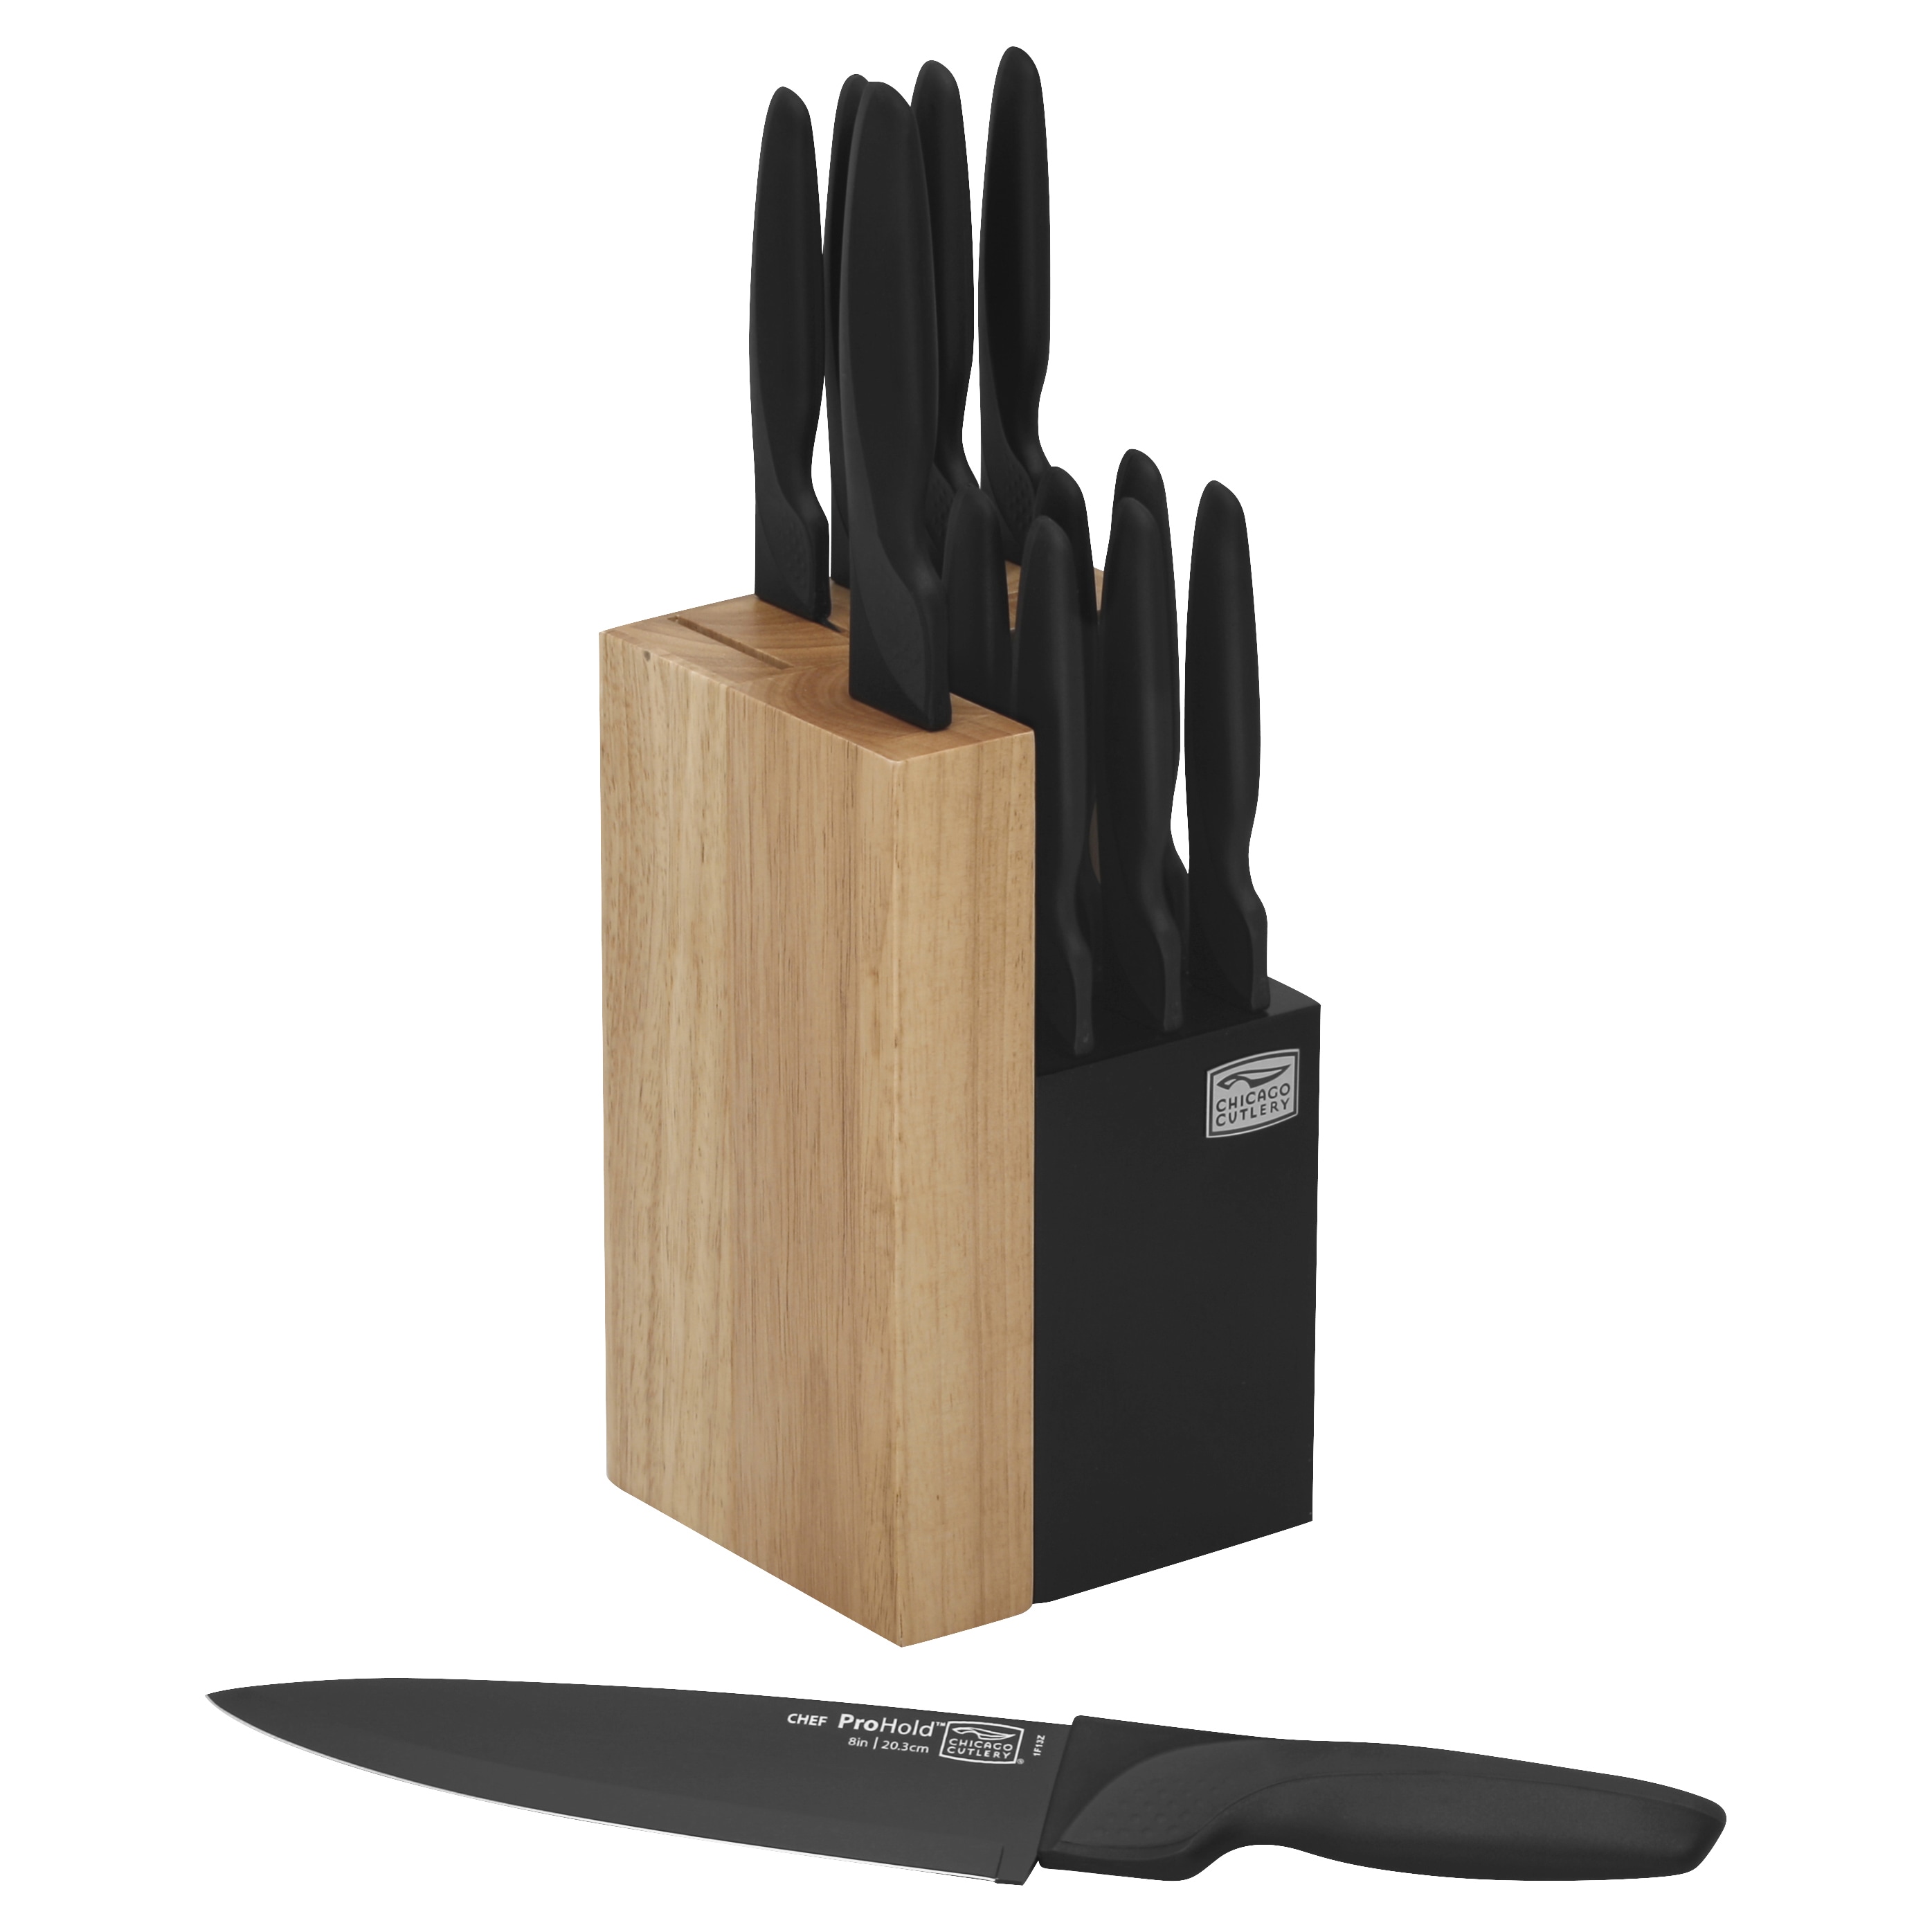 Chicago Cutlery ProHold 14-Piece Block Set - Bed Bath & Beyond